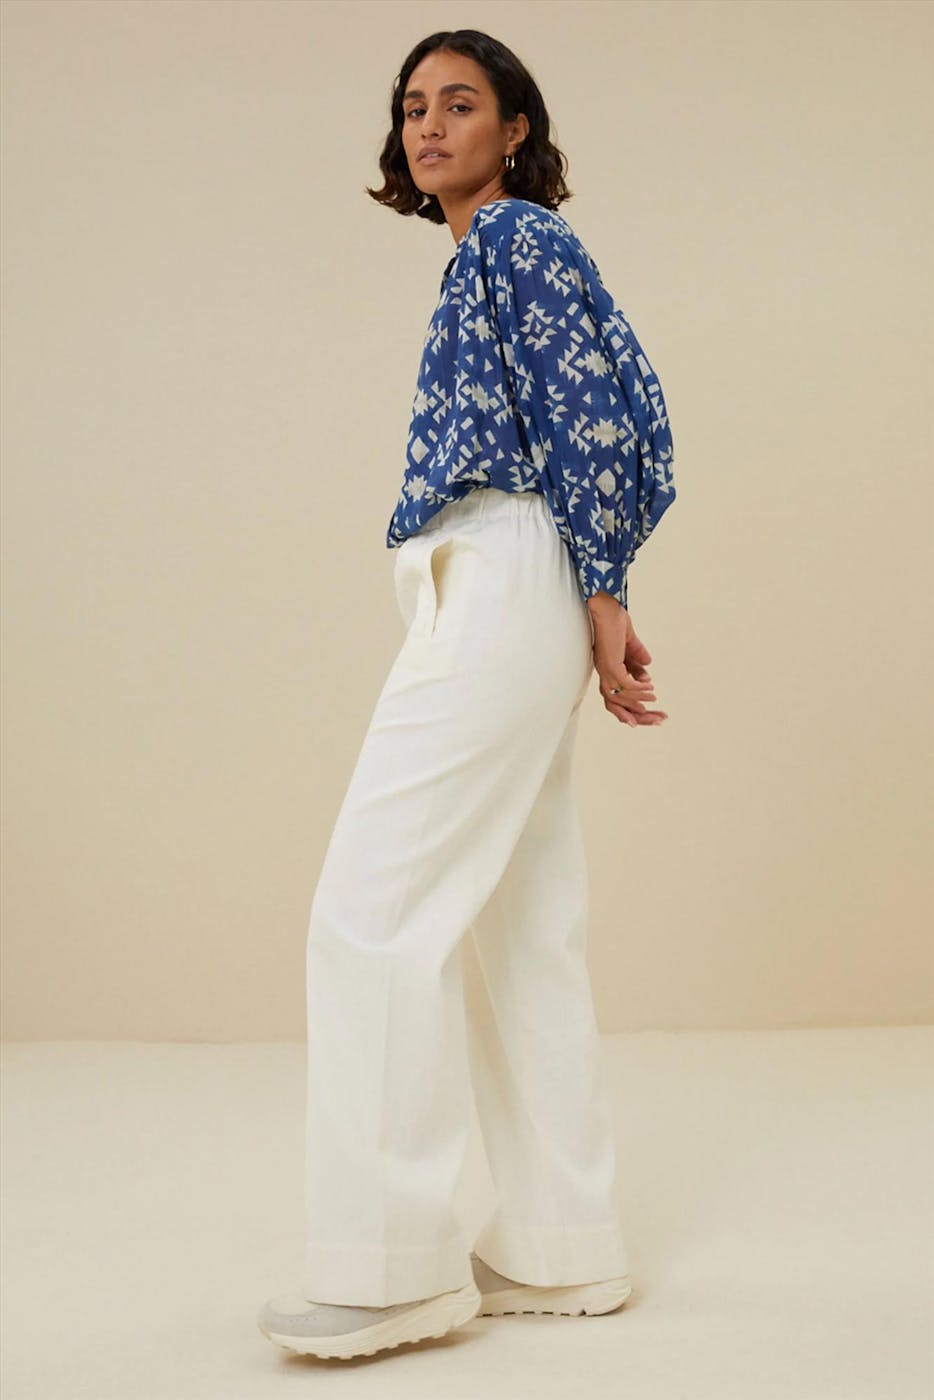 BY BAR - Blauwe Lucy Madras blouse